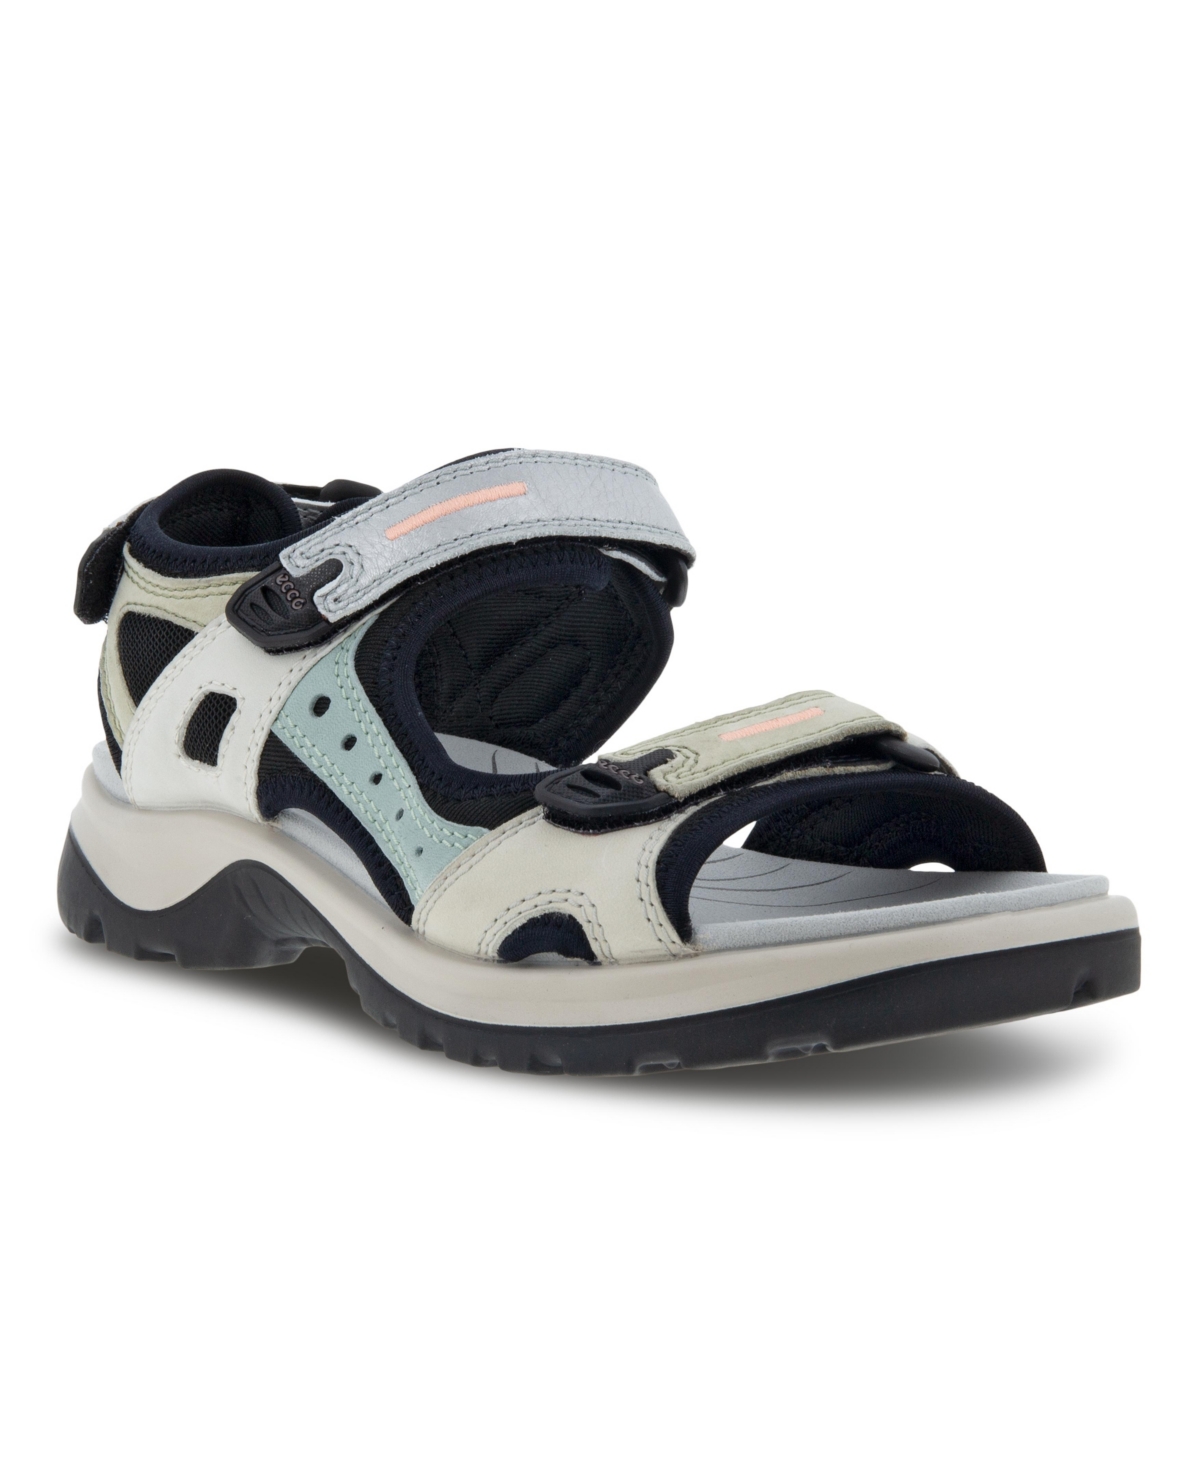 UPC 194891064286 product image for Ecco Women's Offroad Sandals Women's Shoes | upcitemdb.com